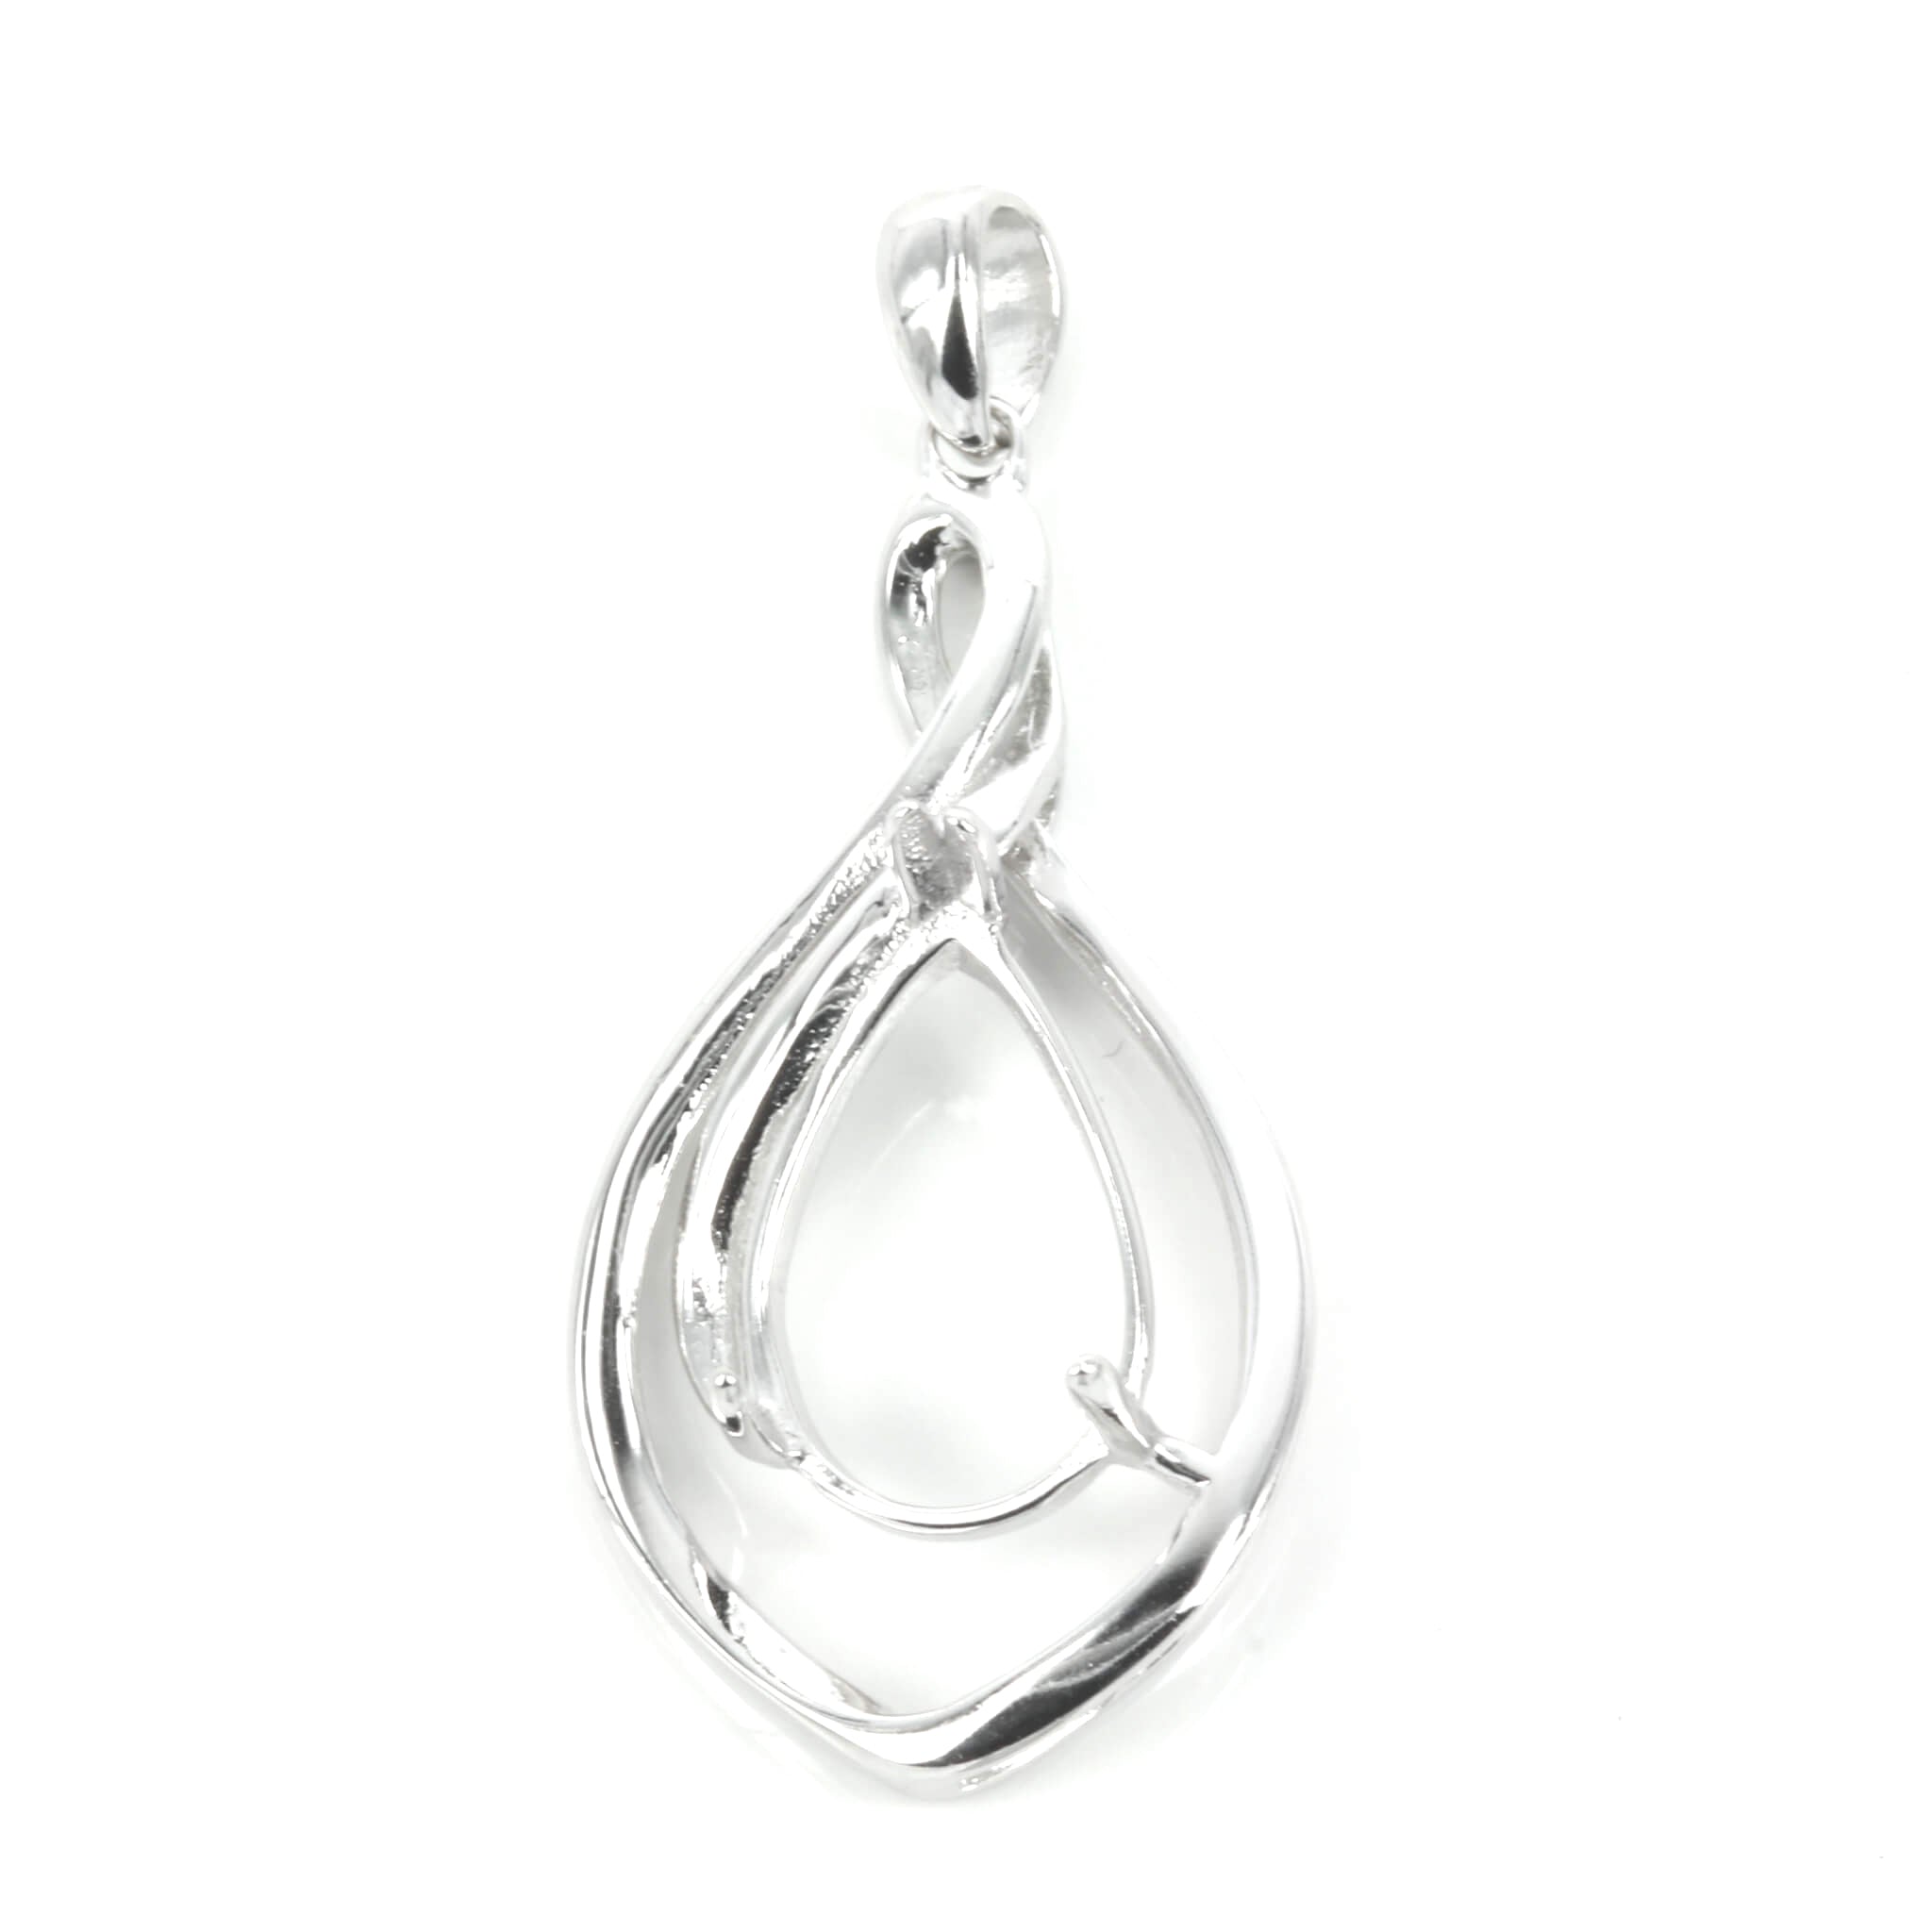 Swirl-Drape Framed Pear Shaped Pendant Setting with Pear Prongs Mounting including Bail in Sterling Silver 8x12mm